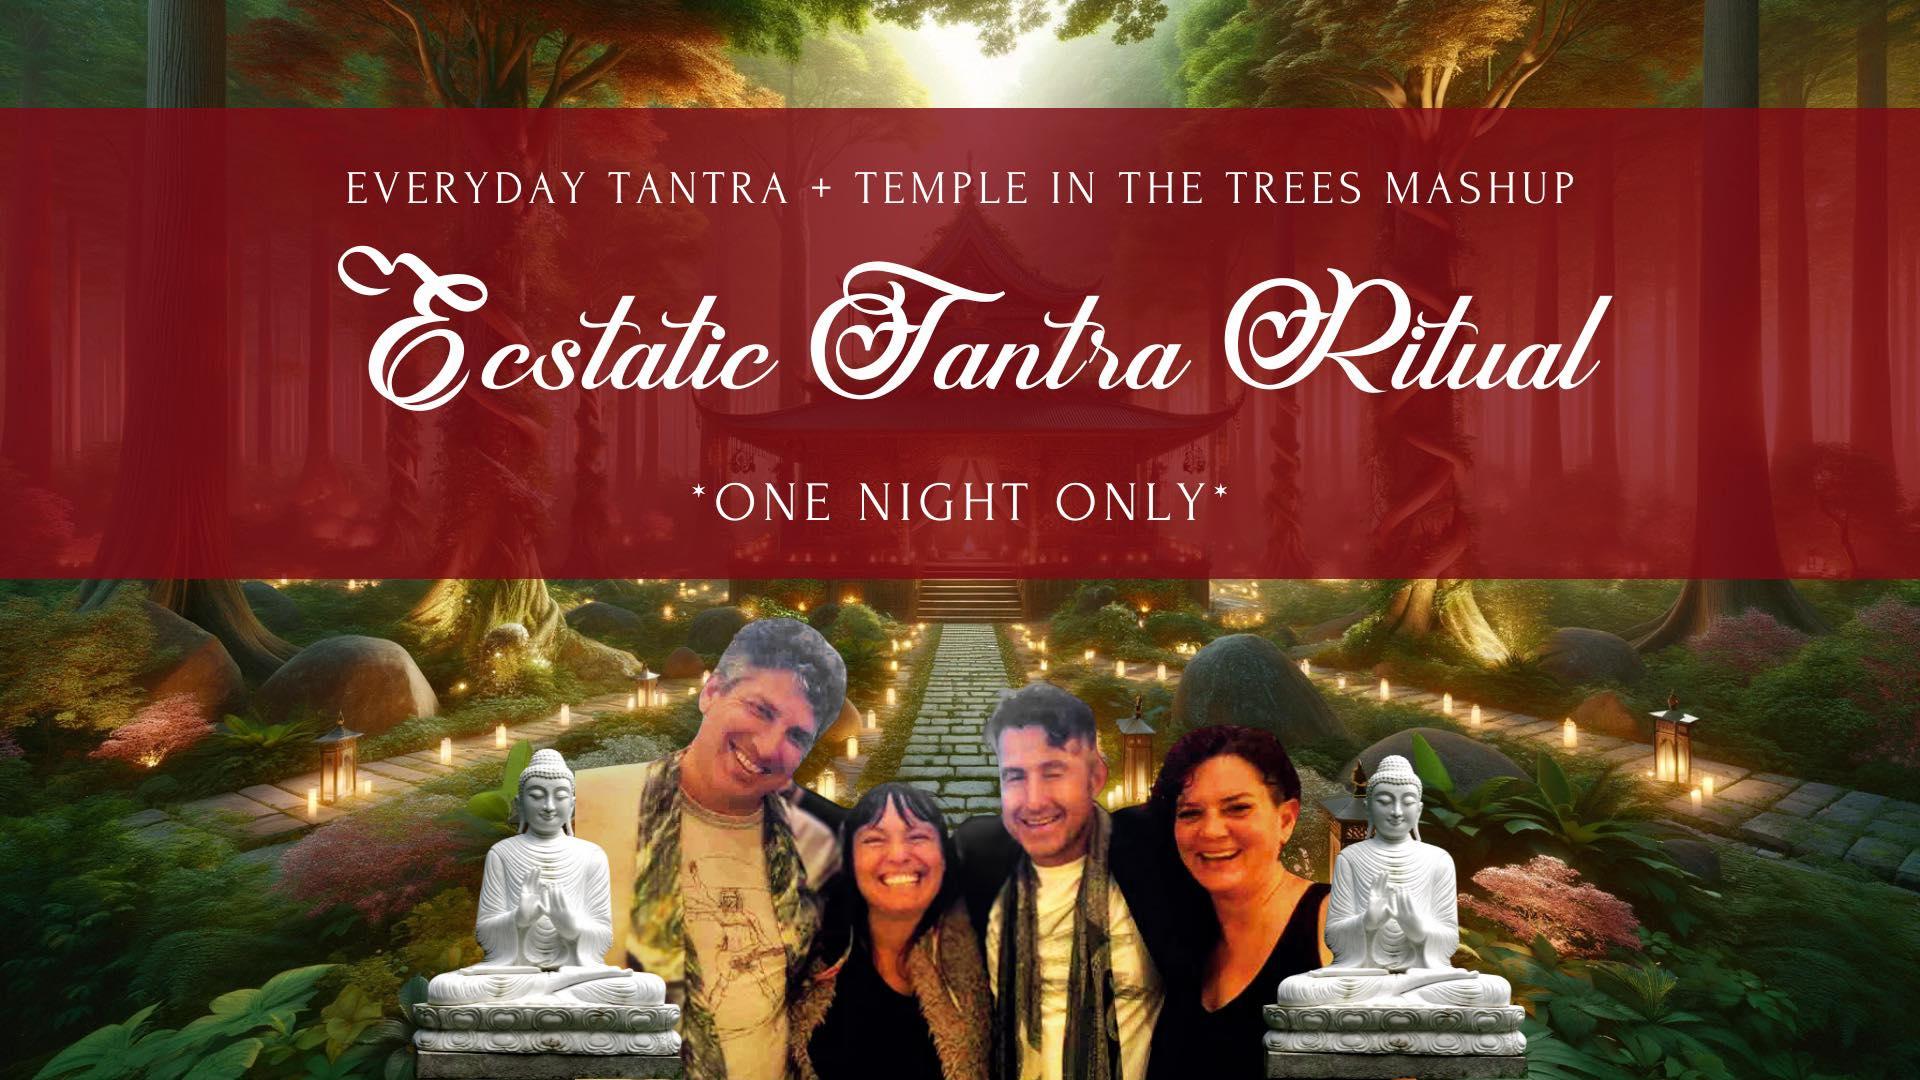 EverydayTantra and Temple in the Trees Present An Ecstatic Tantric Ritual